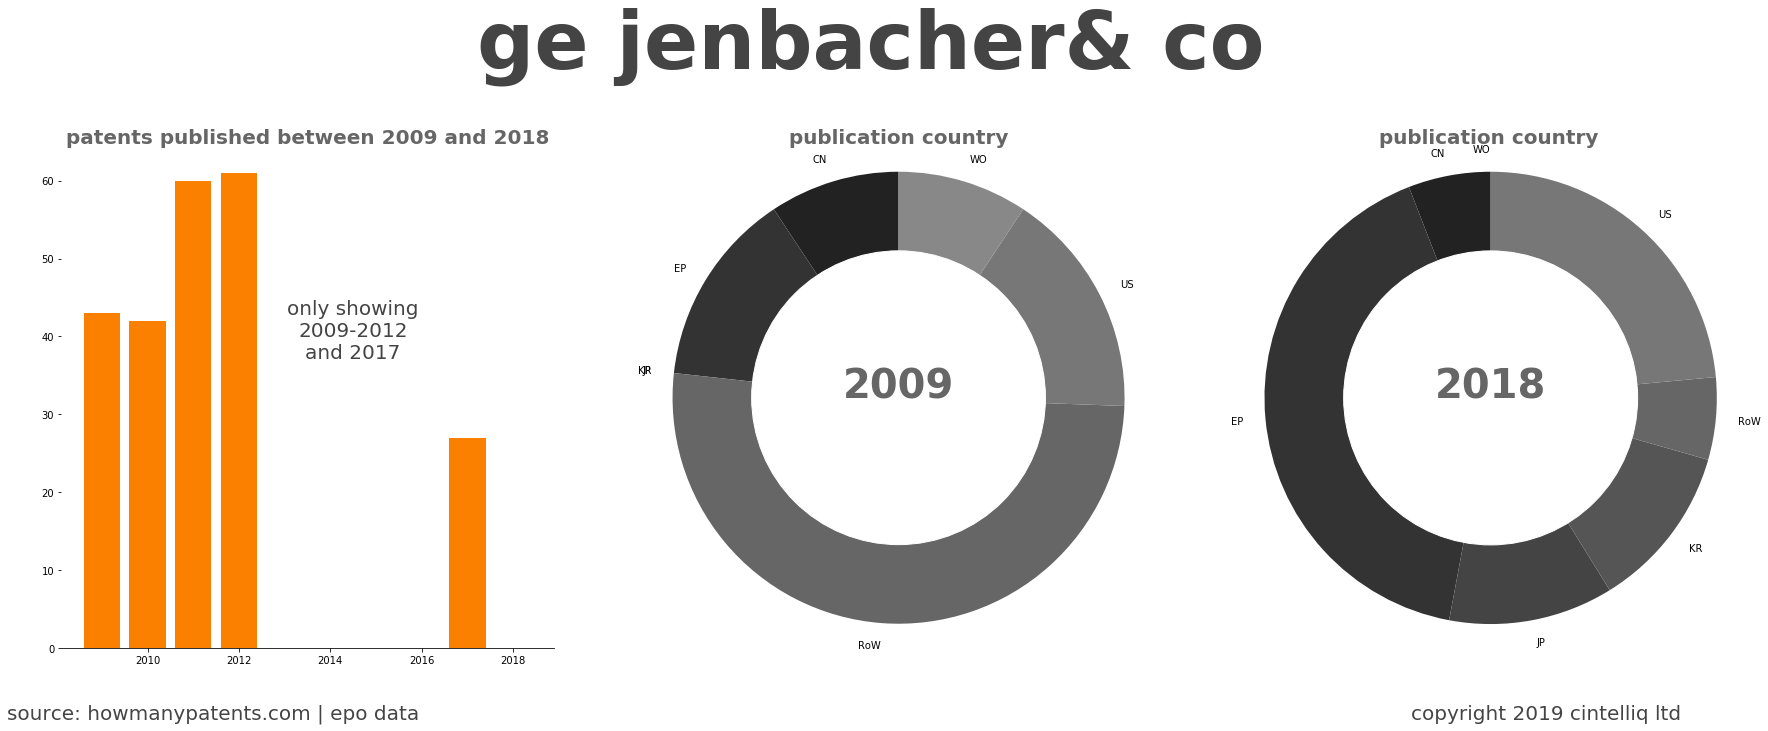 summary of patents for Ge Jenbacher& Co